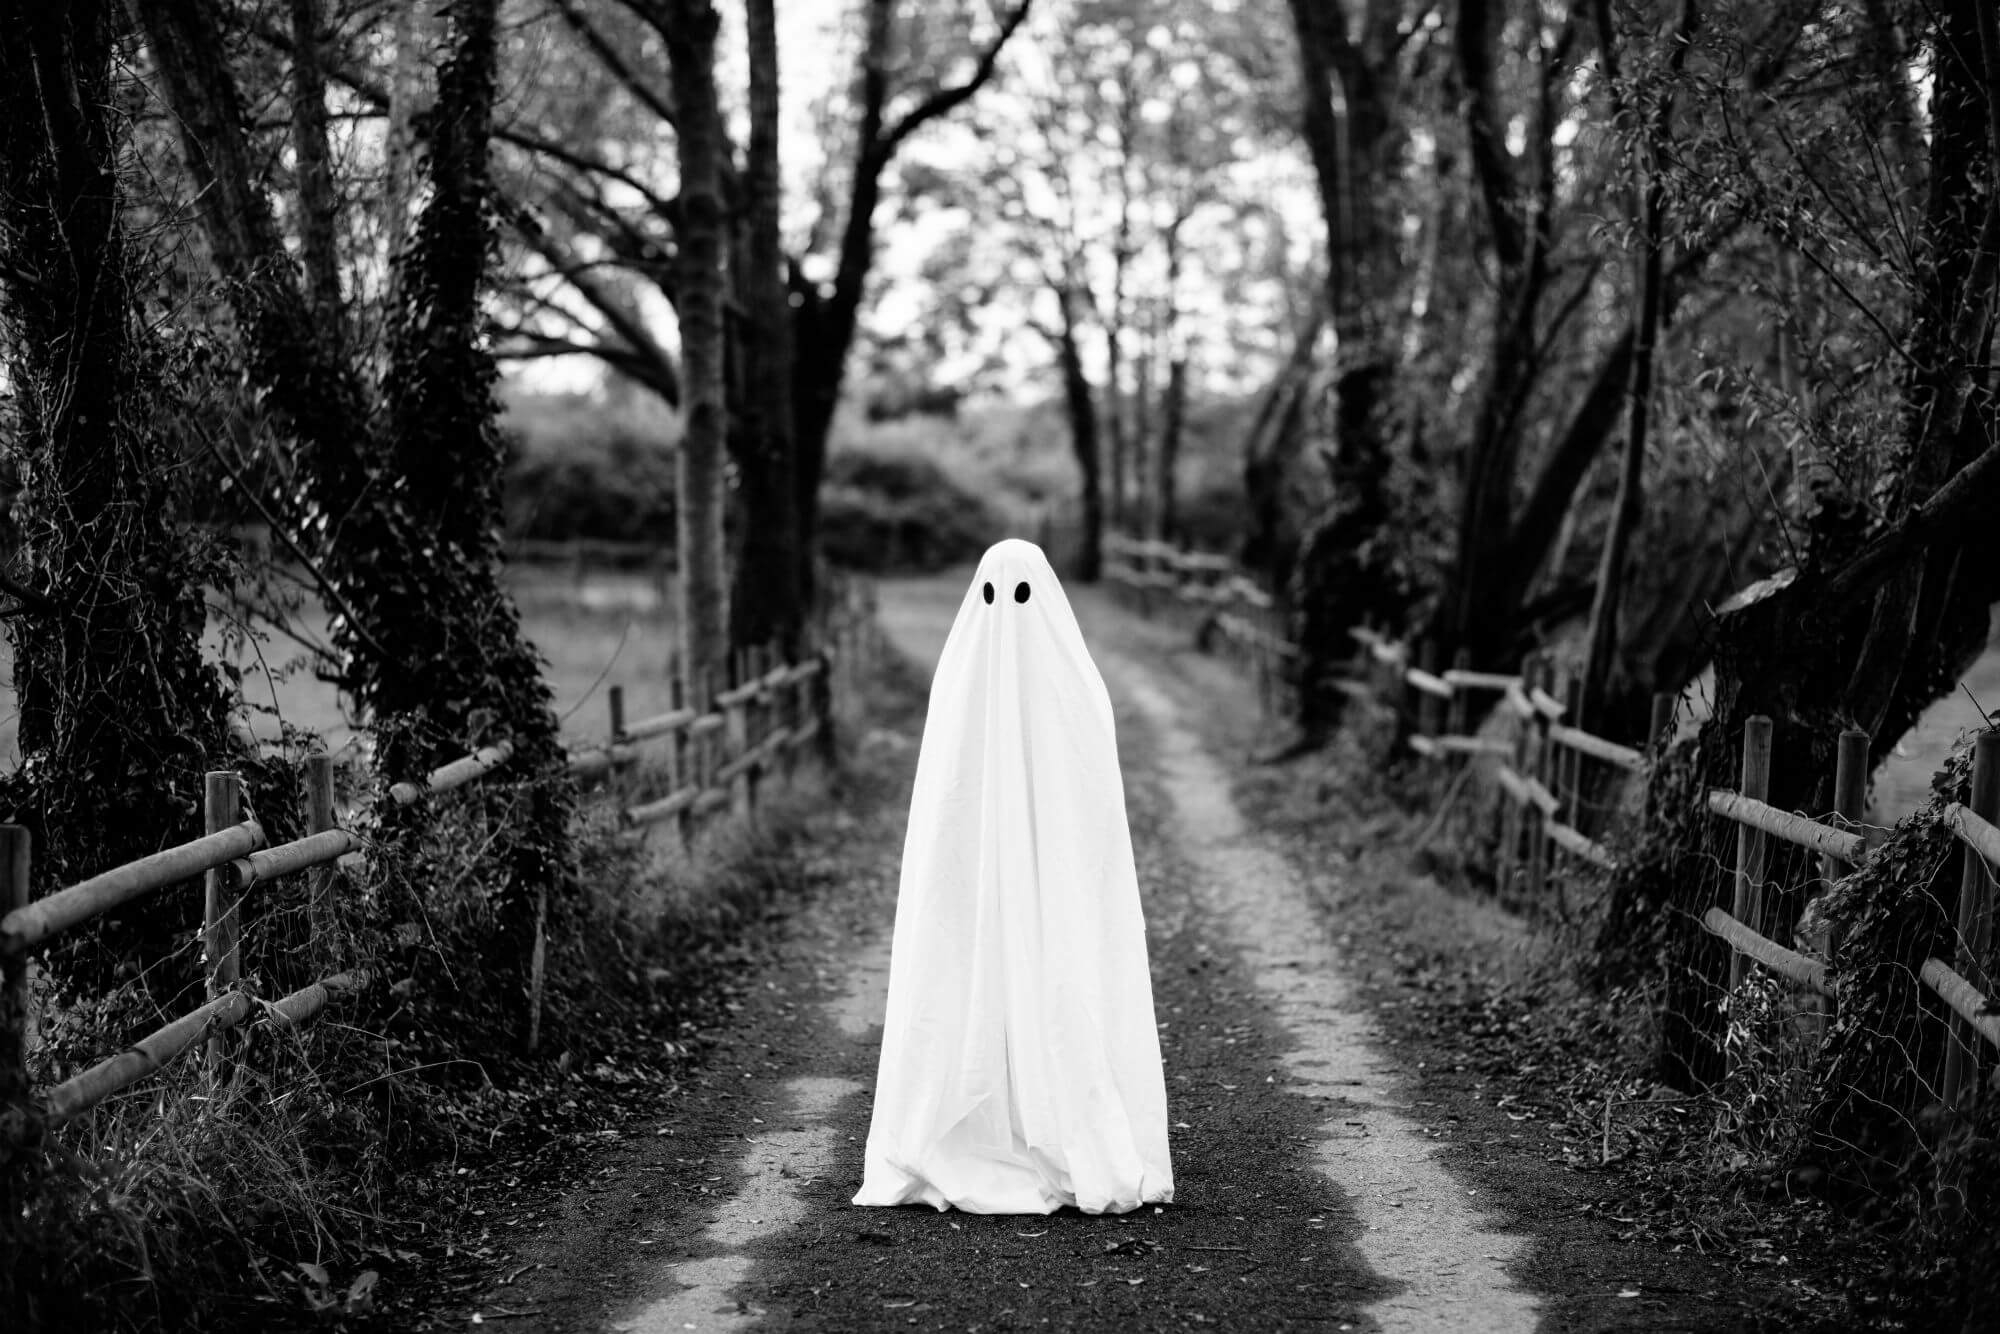 Afraid of ghosts? Scientists say it's because you yourself want